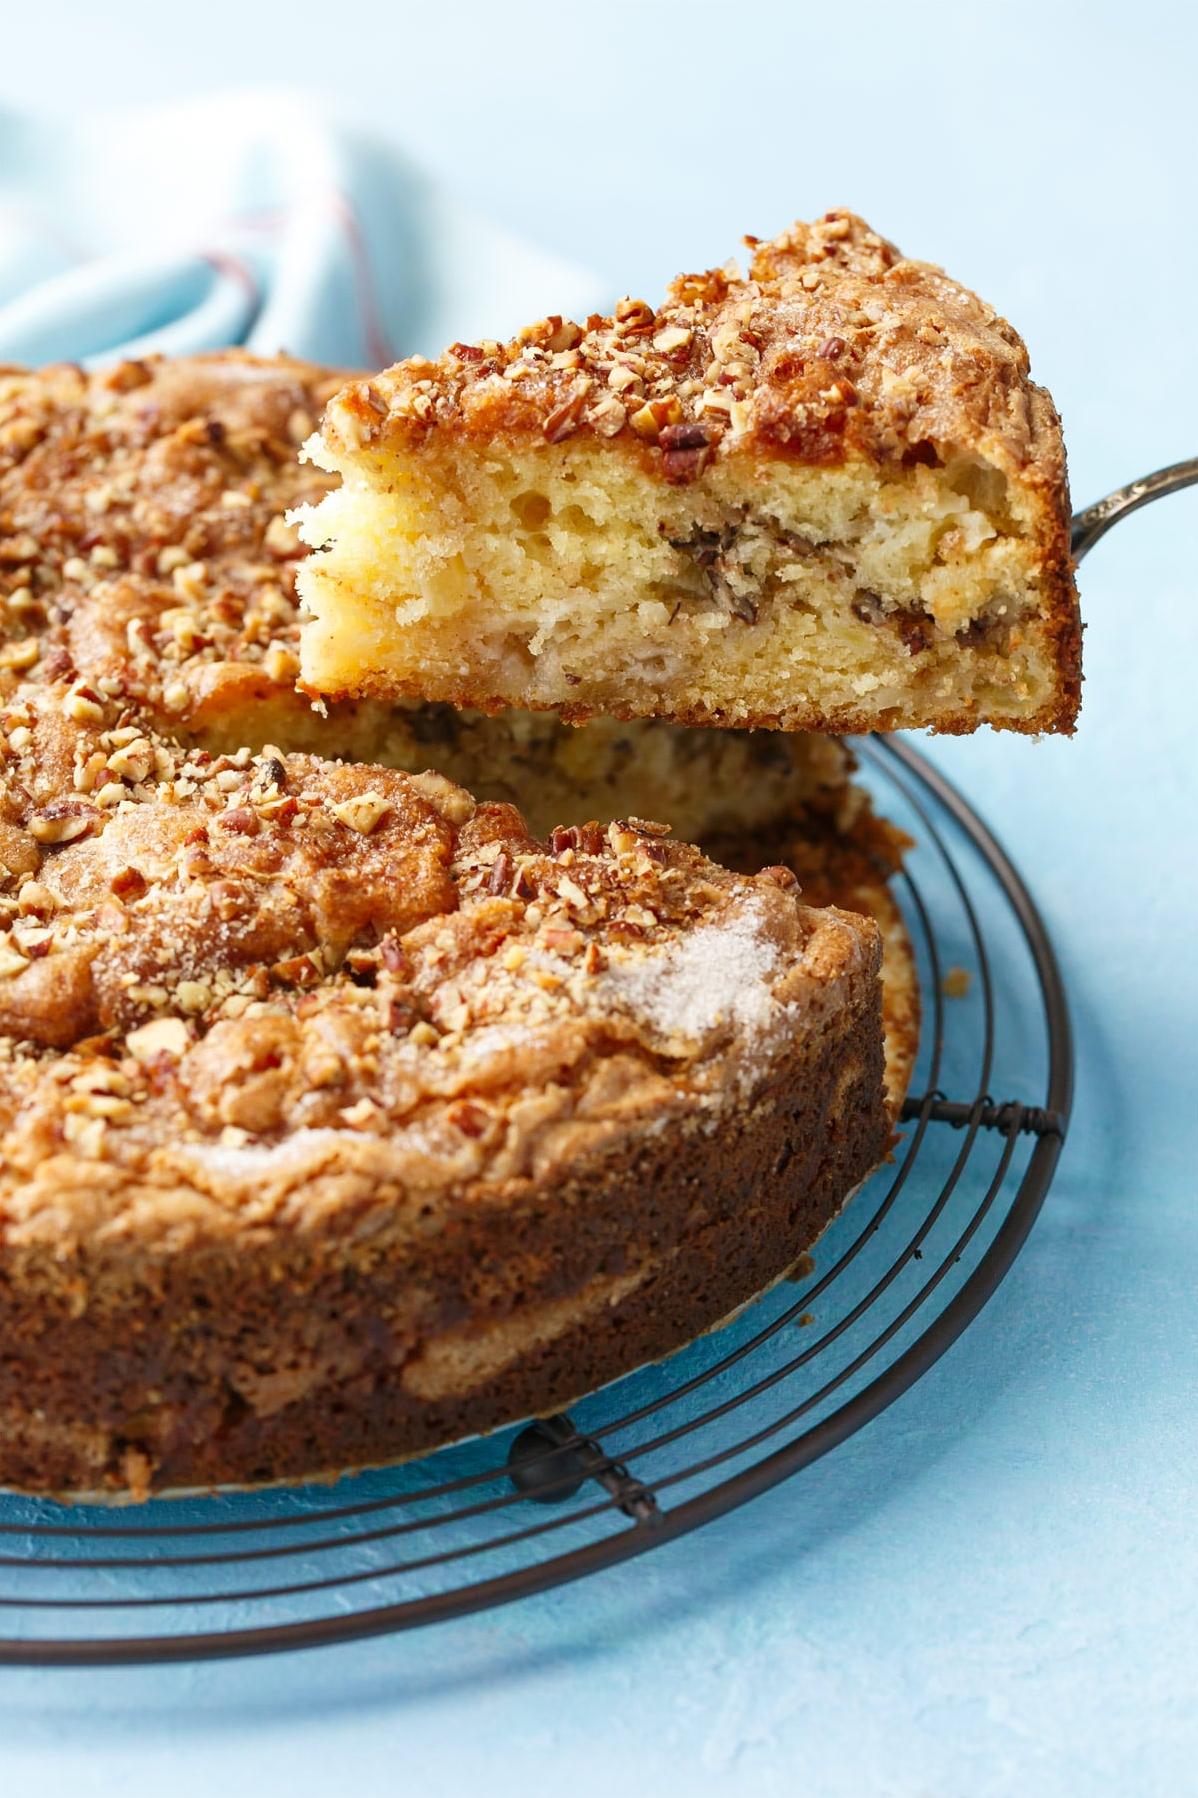  This delicious treat is loaded with creamy honey and apple goodness